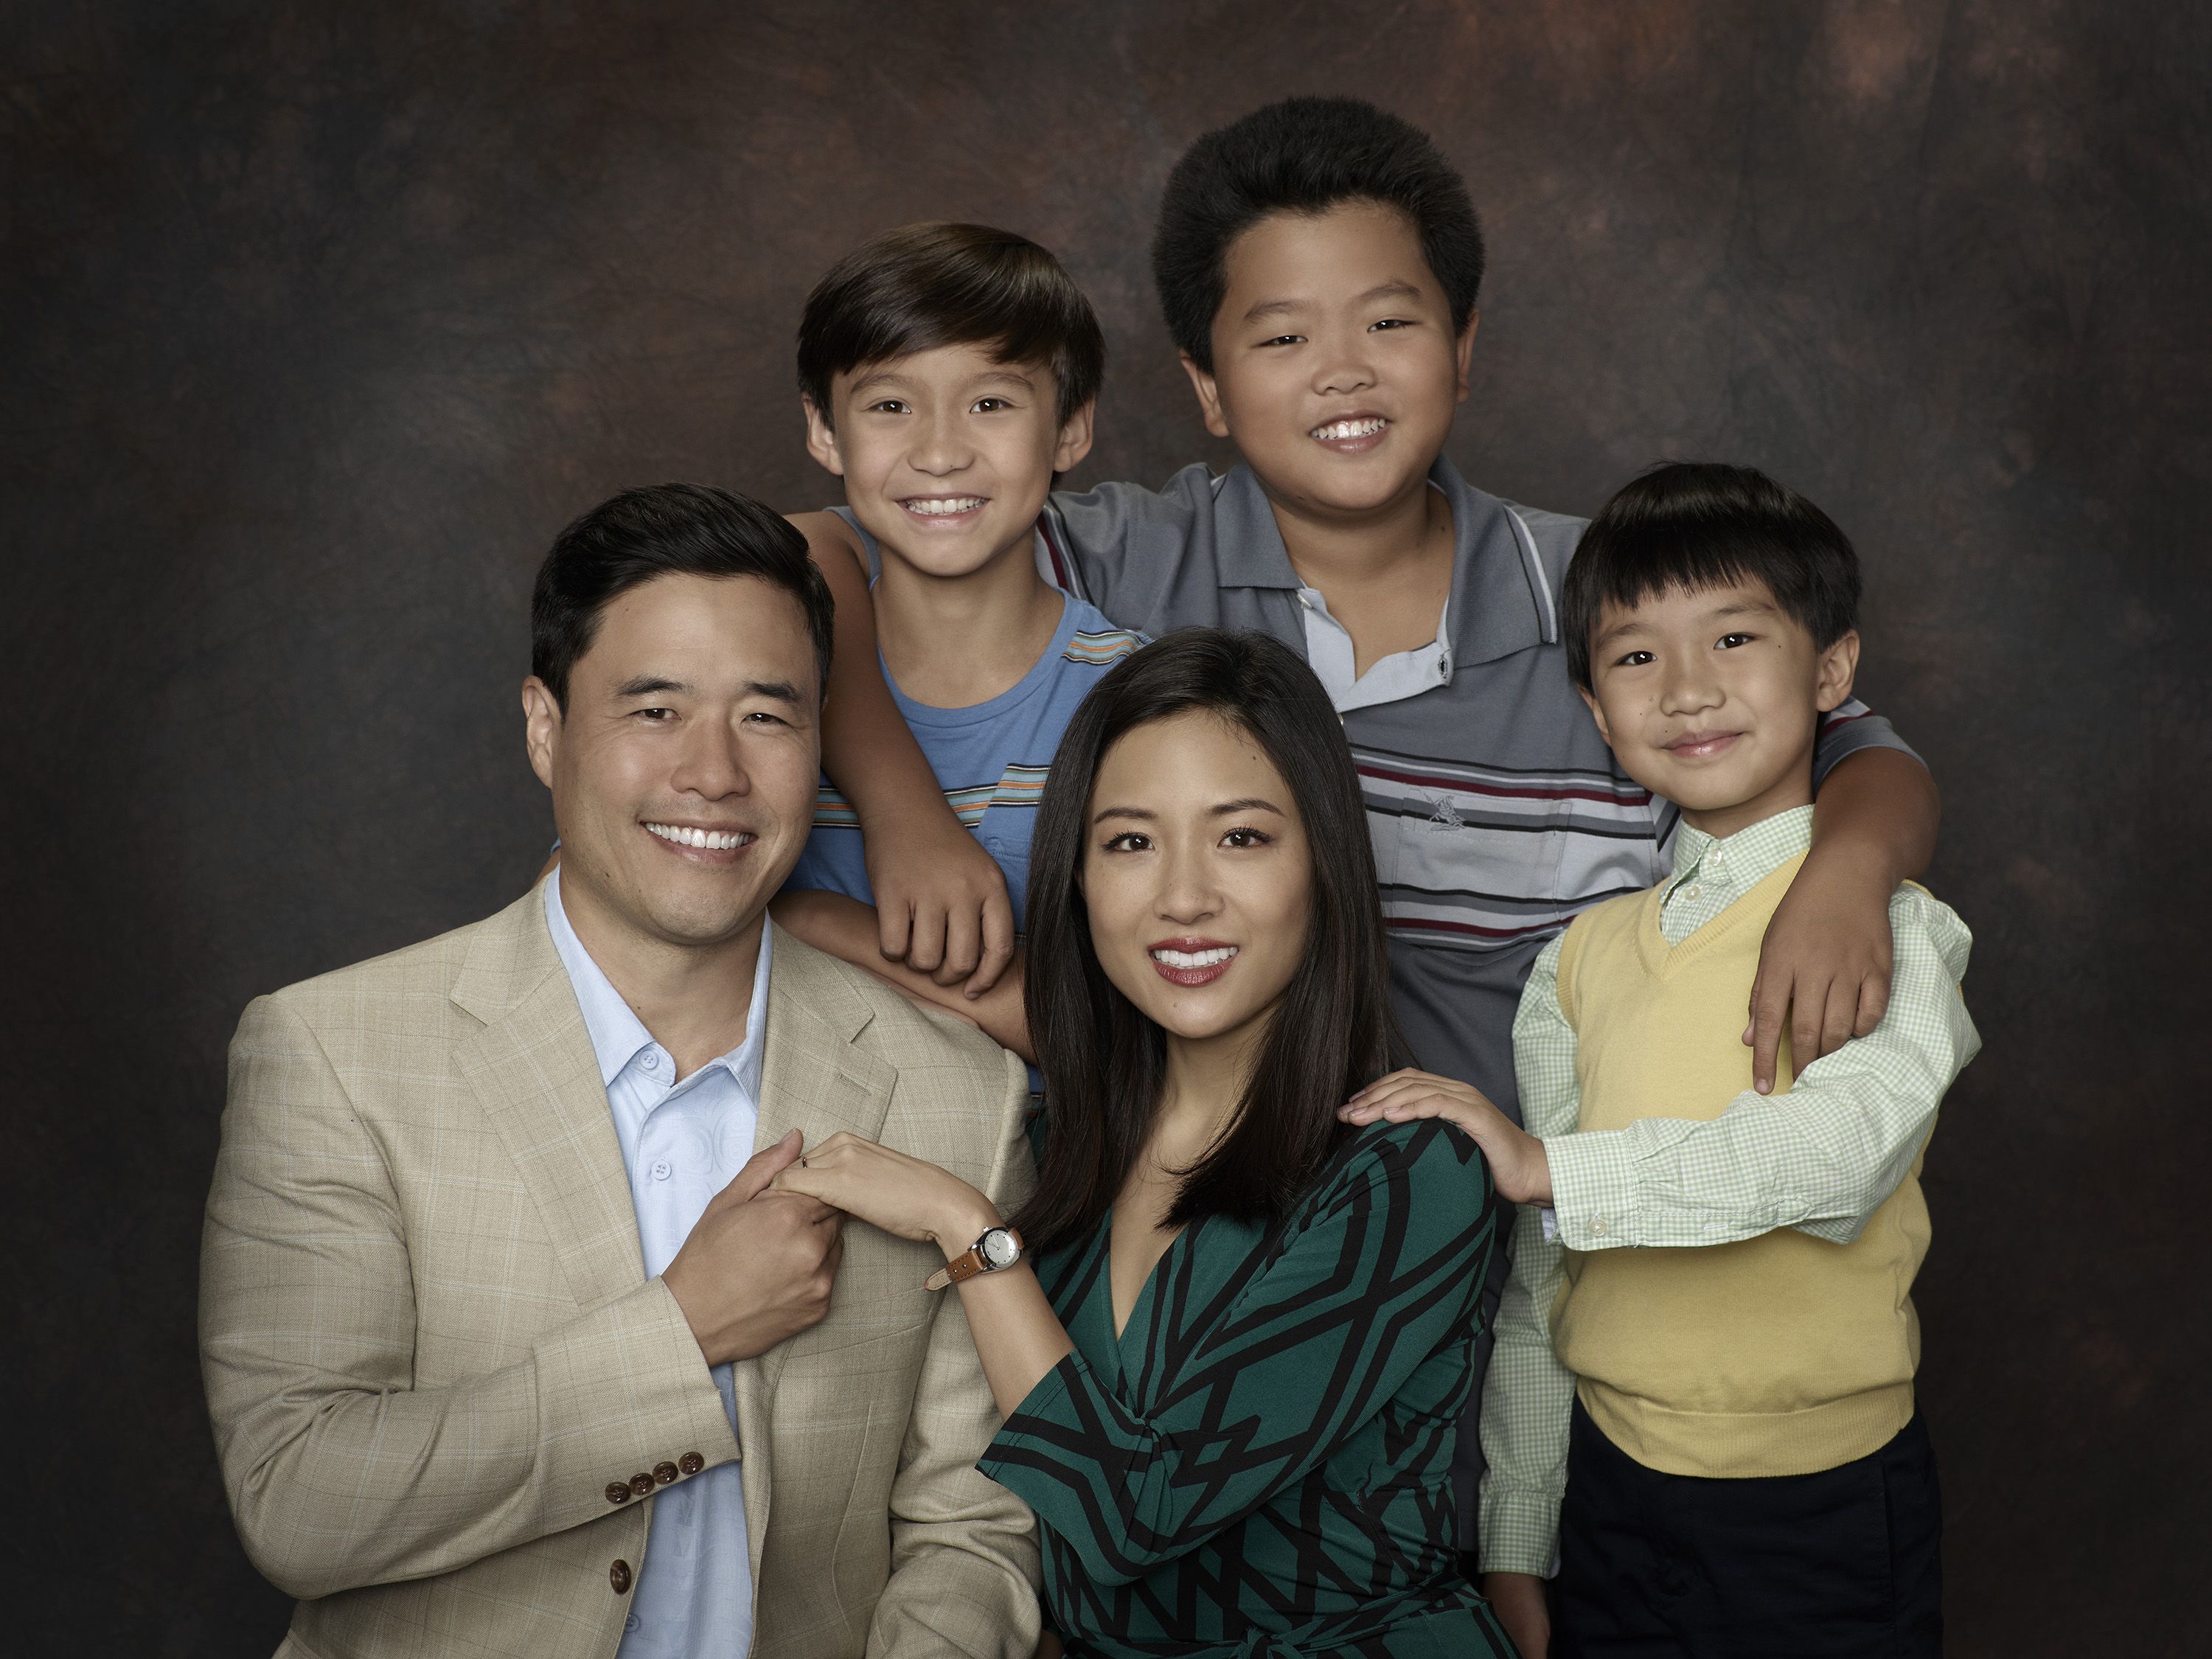 Fresh Off the Boat nailed its depiction of what the reverse pilgrimage to  Asia is like as a young Asian American.